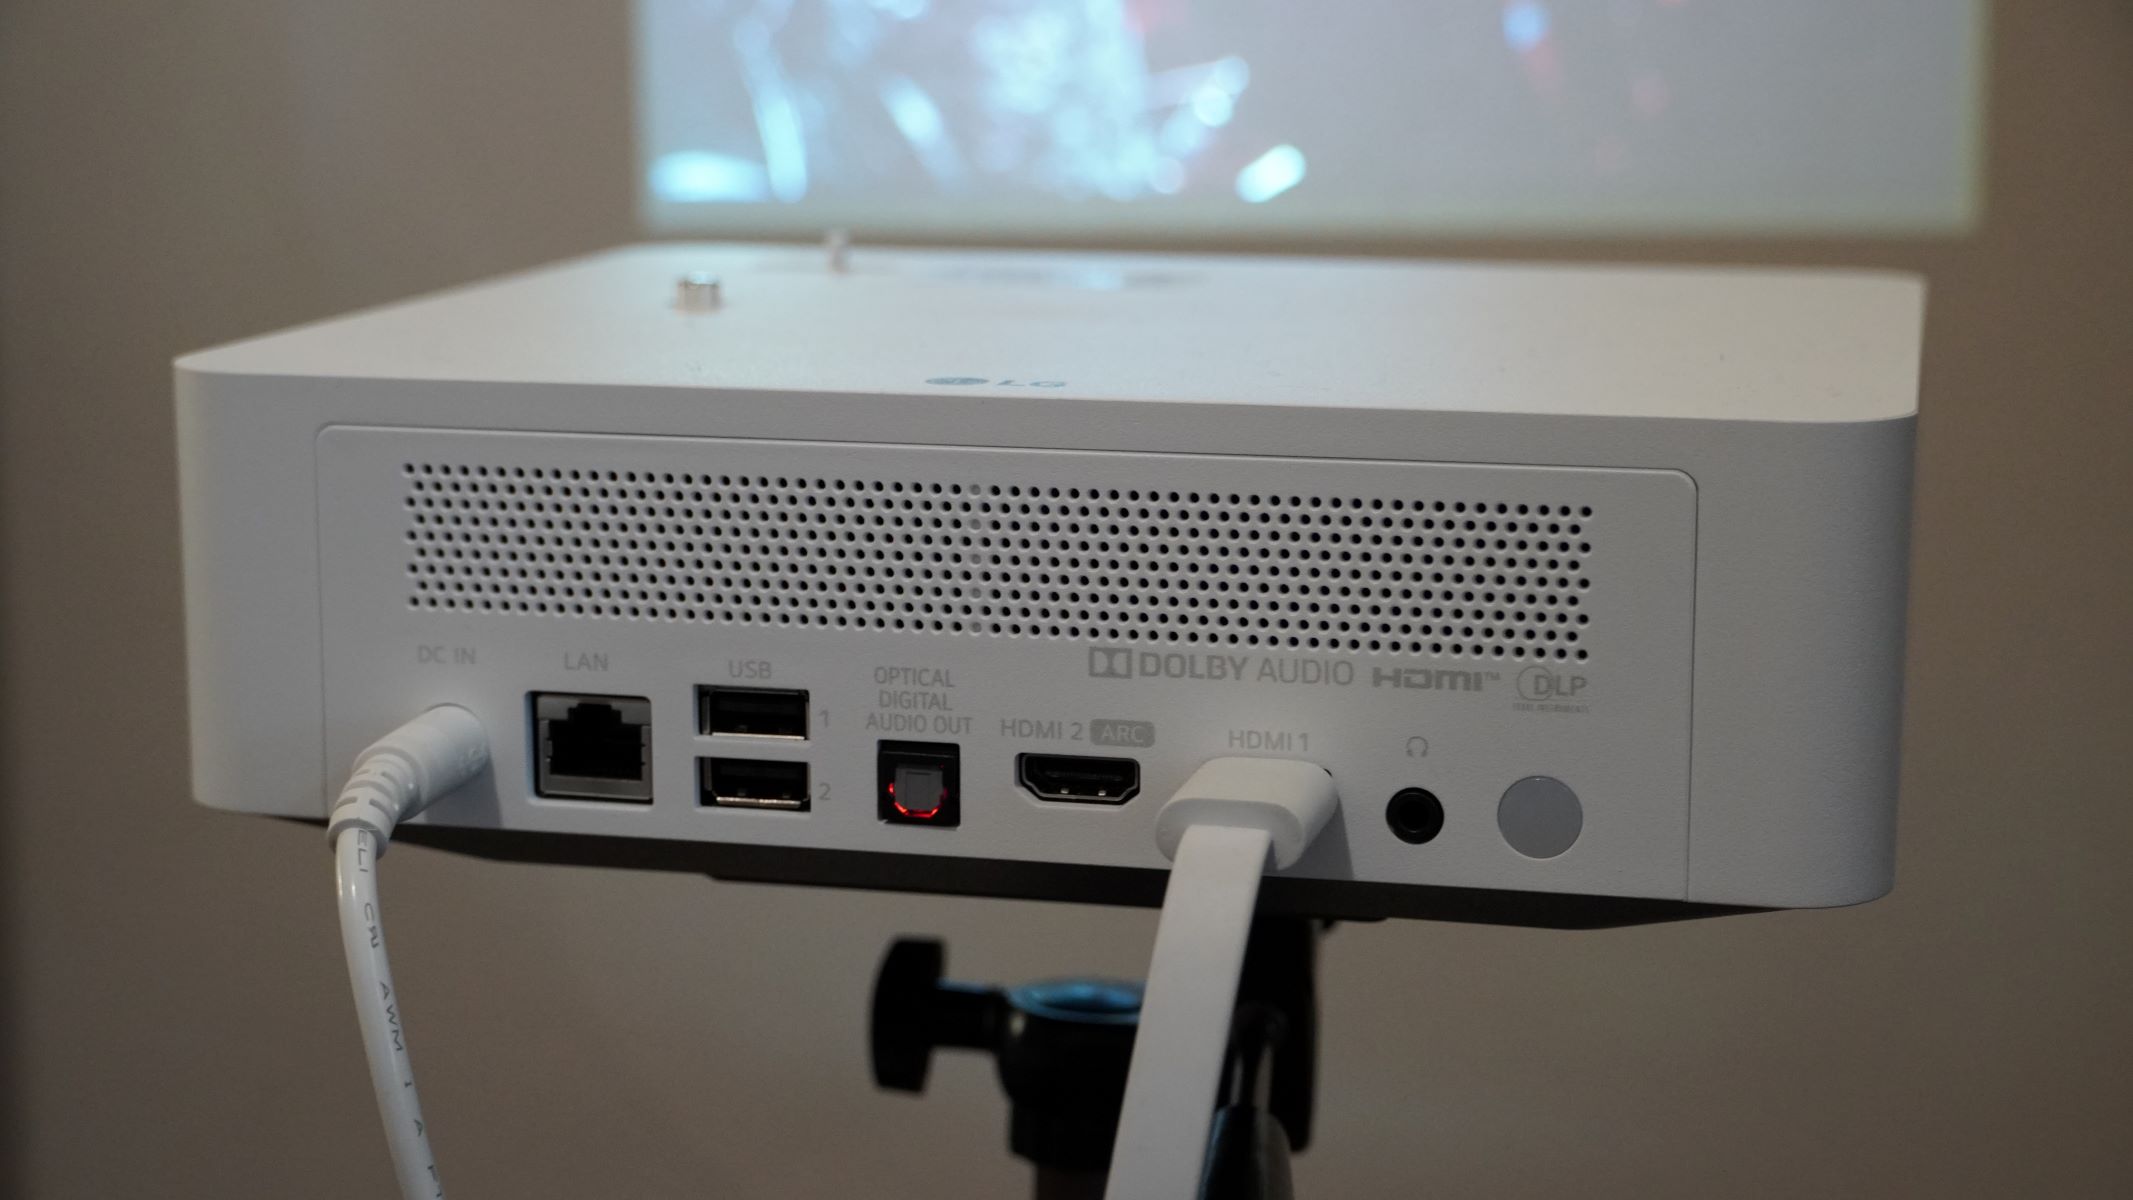 Connecting IPhone To LG Projector: Step-by-Step Instructions